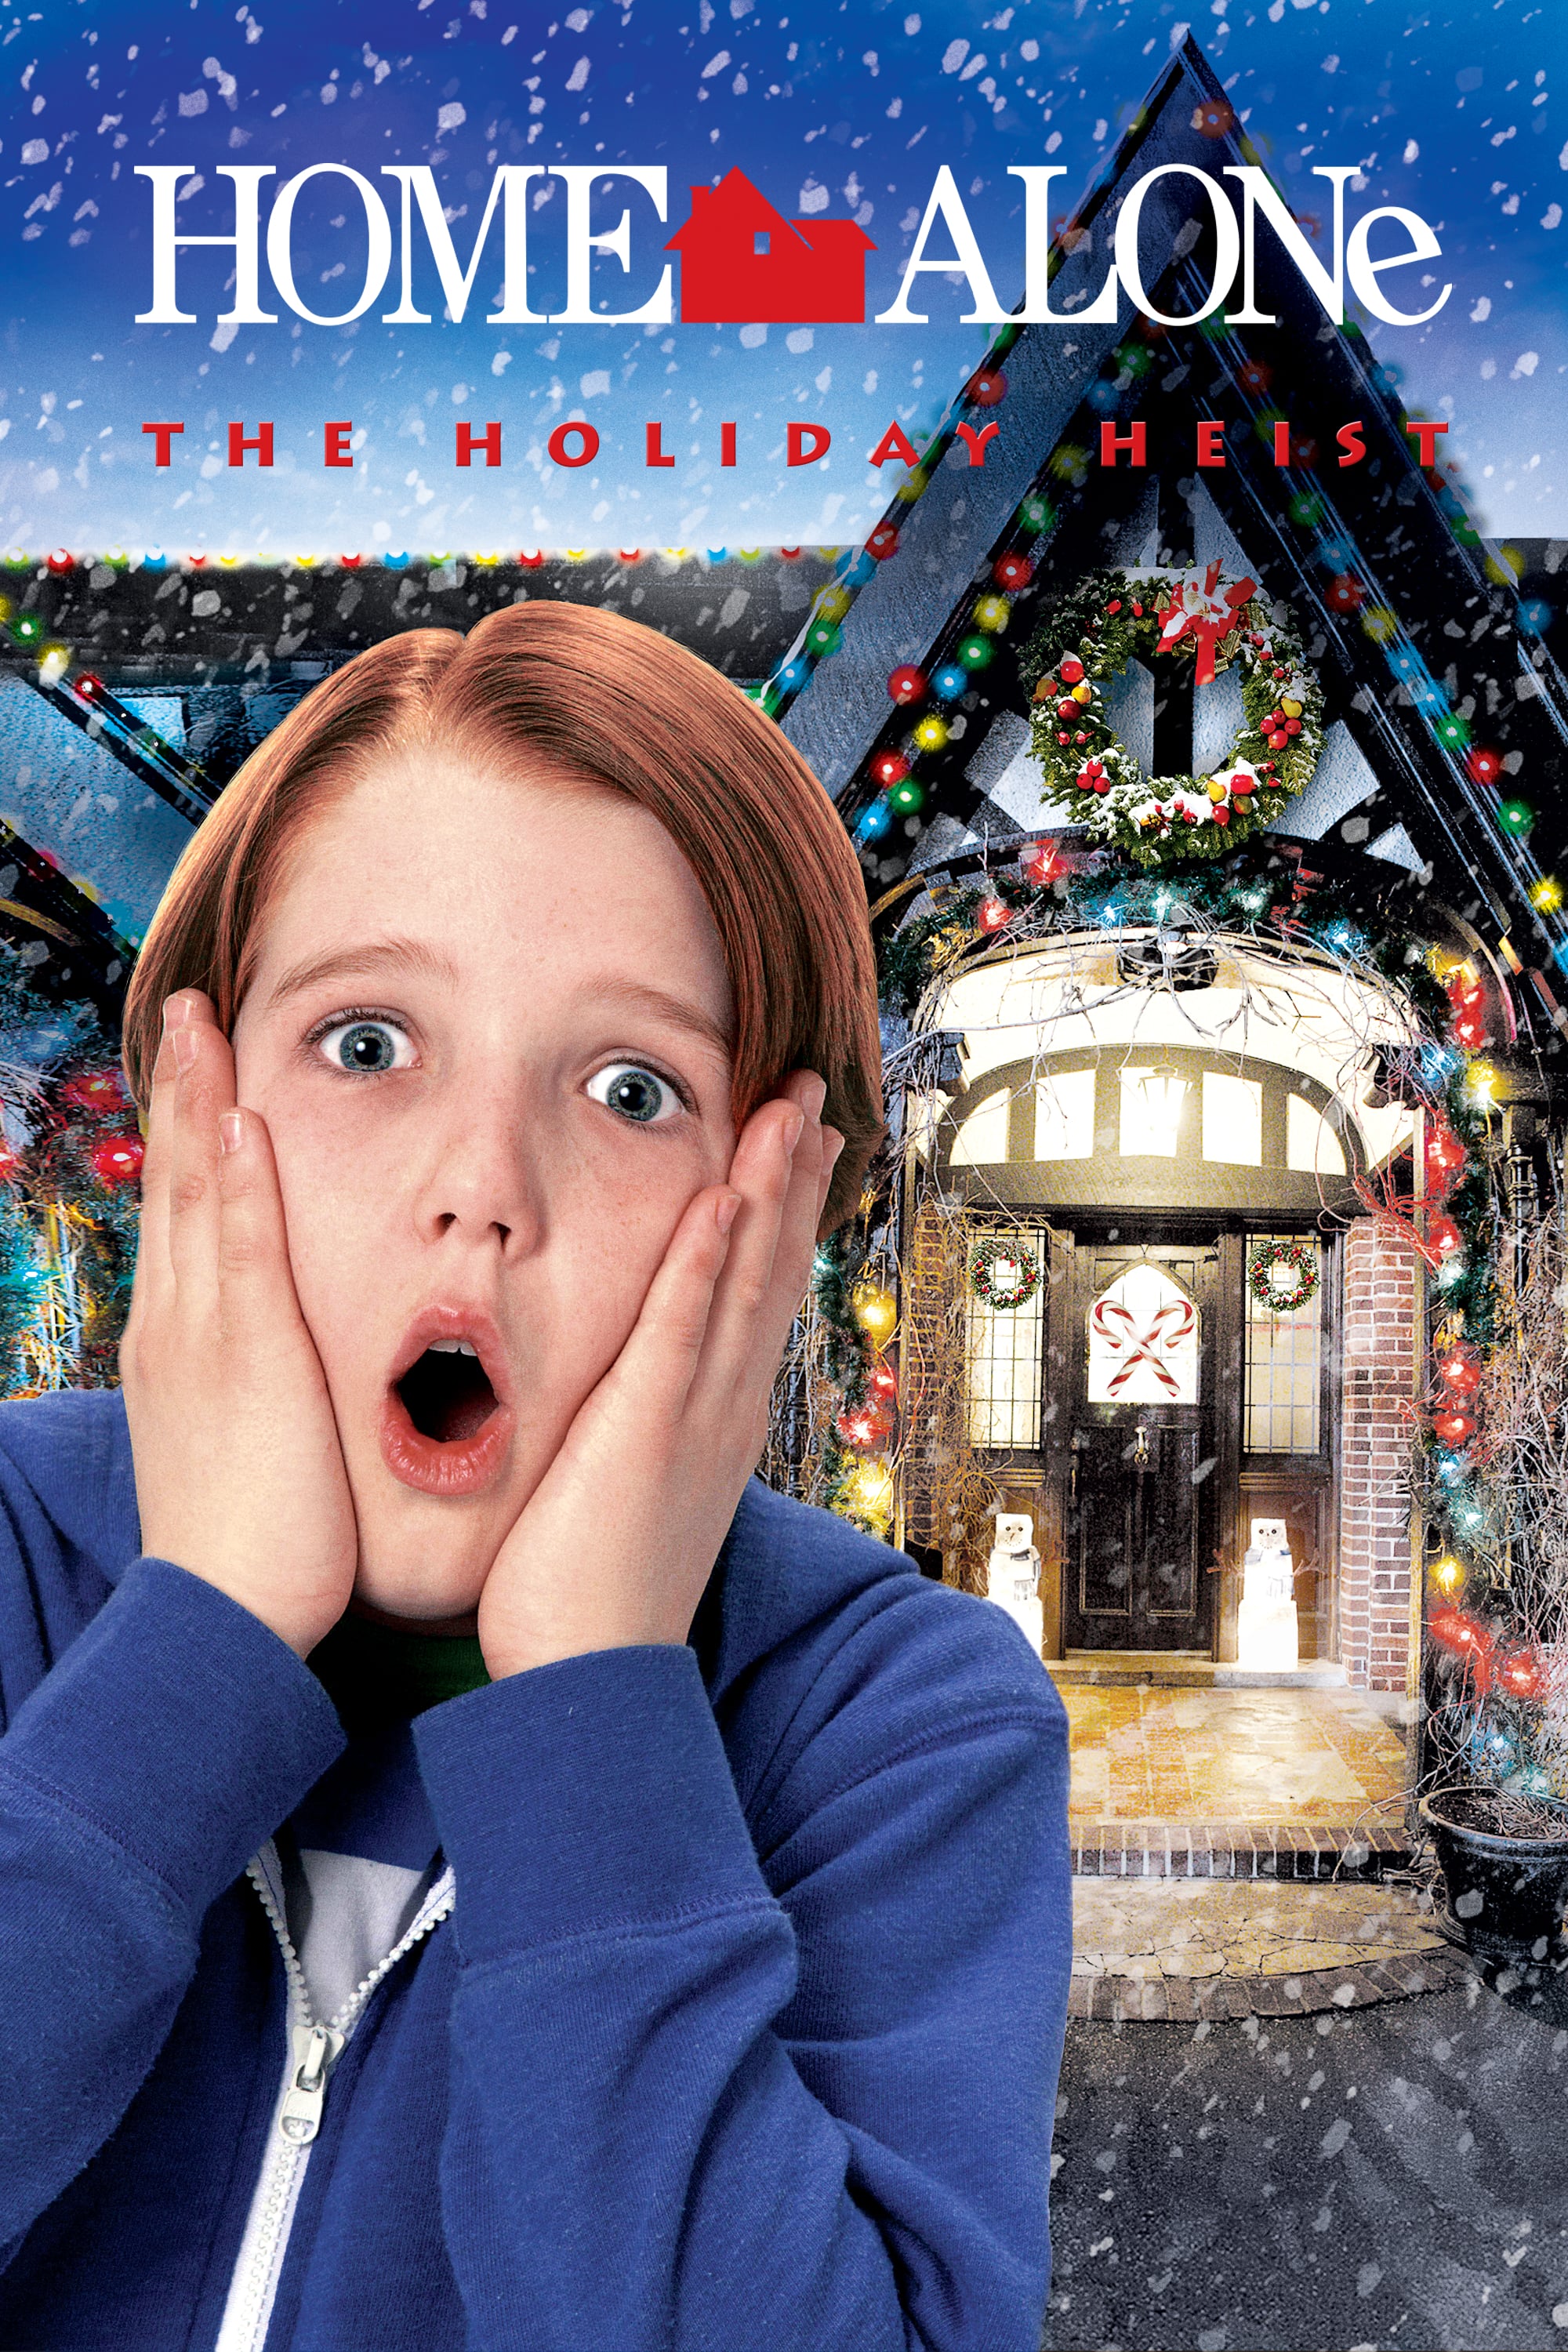 Poster for the movie "Home Alone 5: The Holiday Heist"